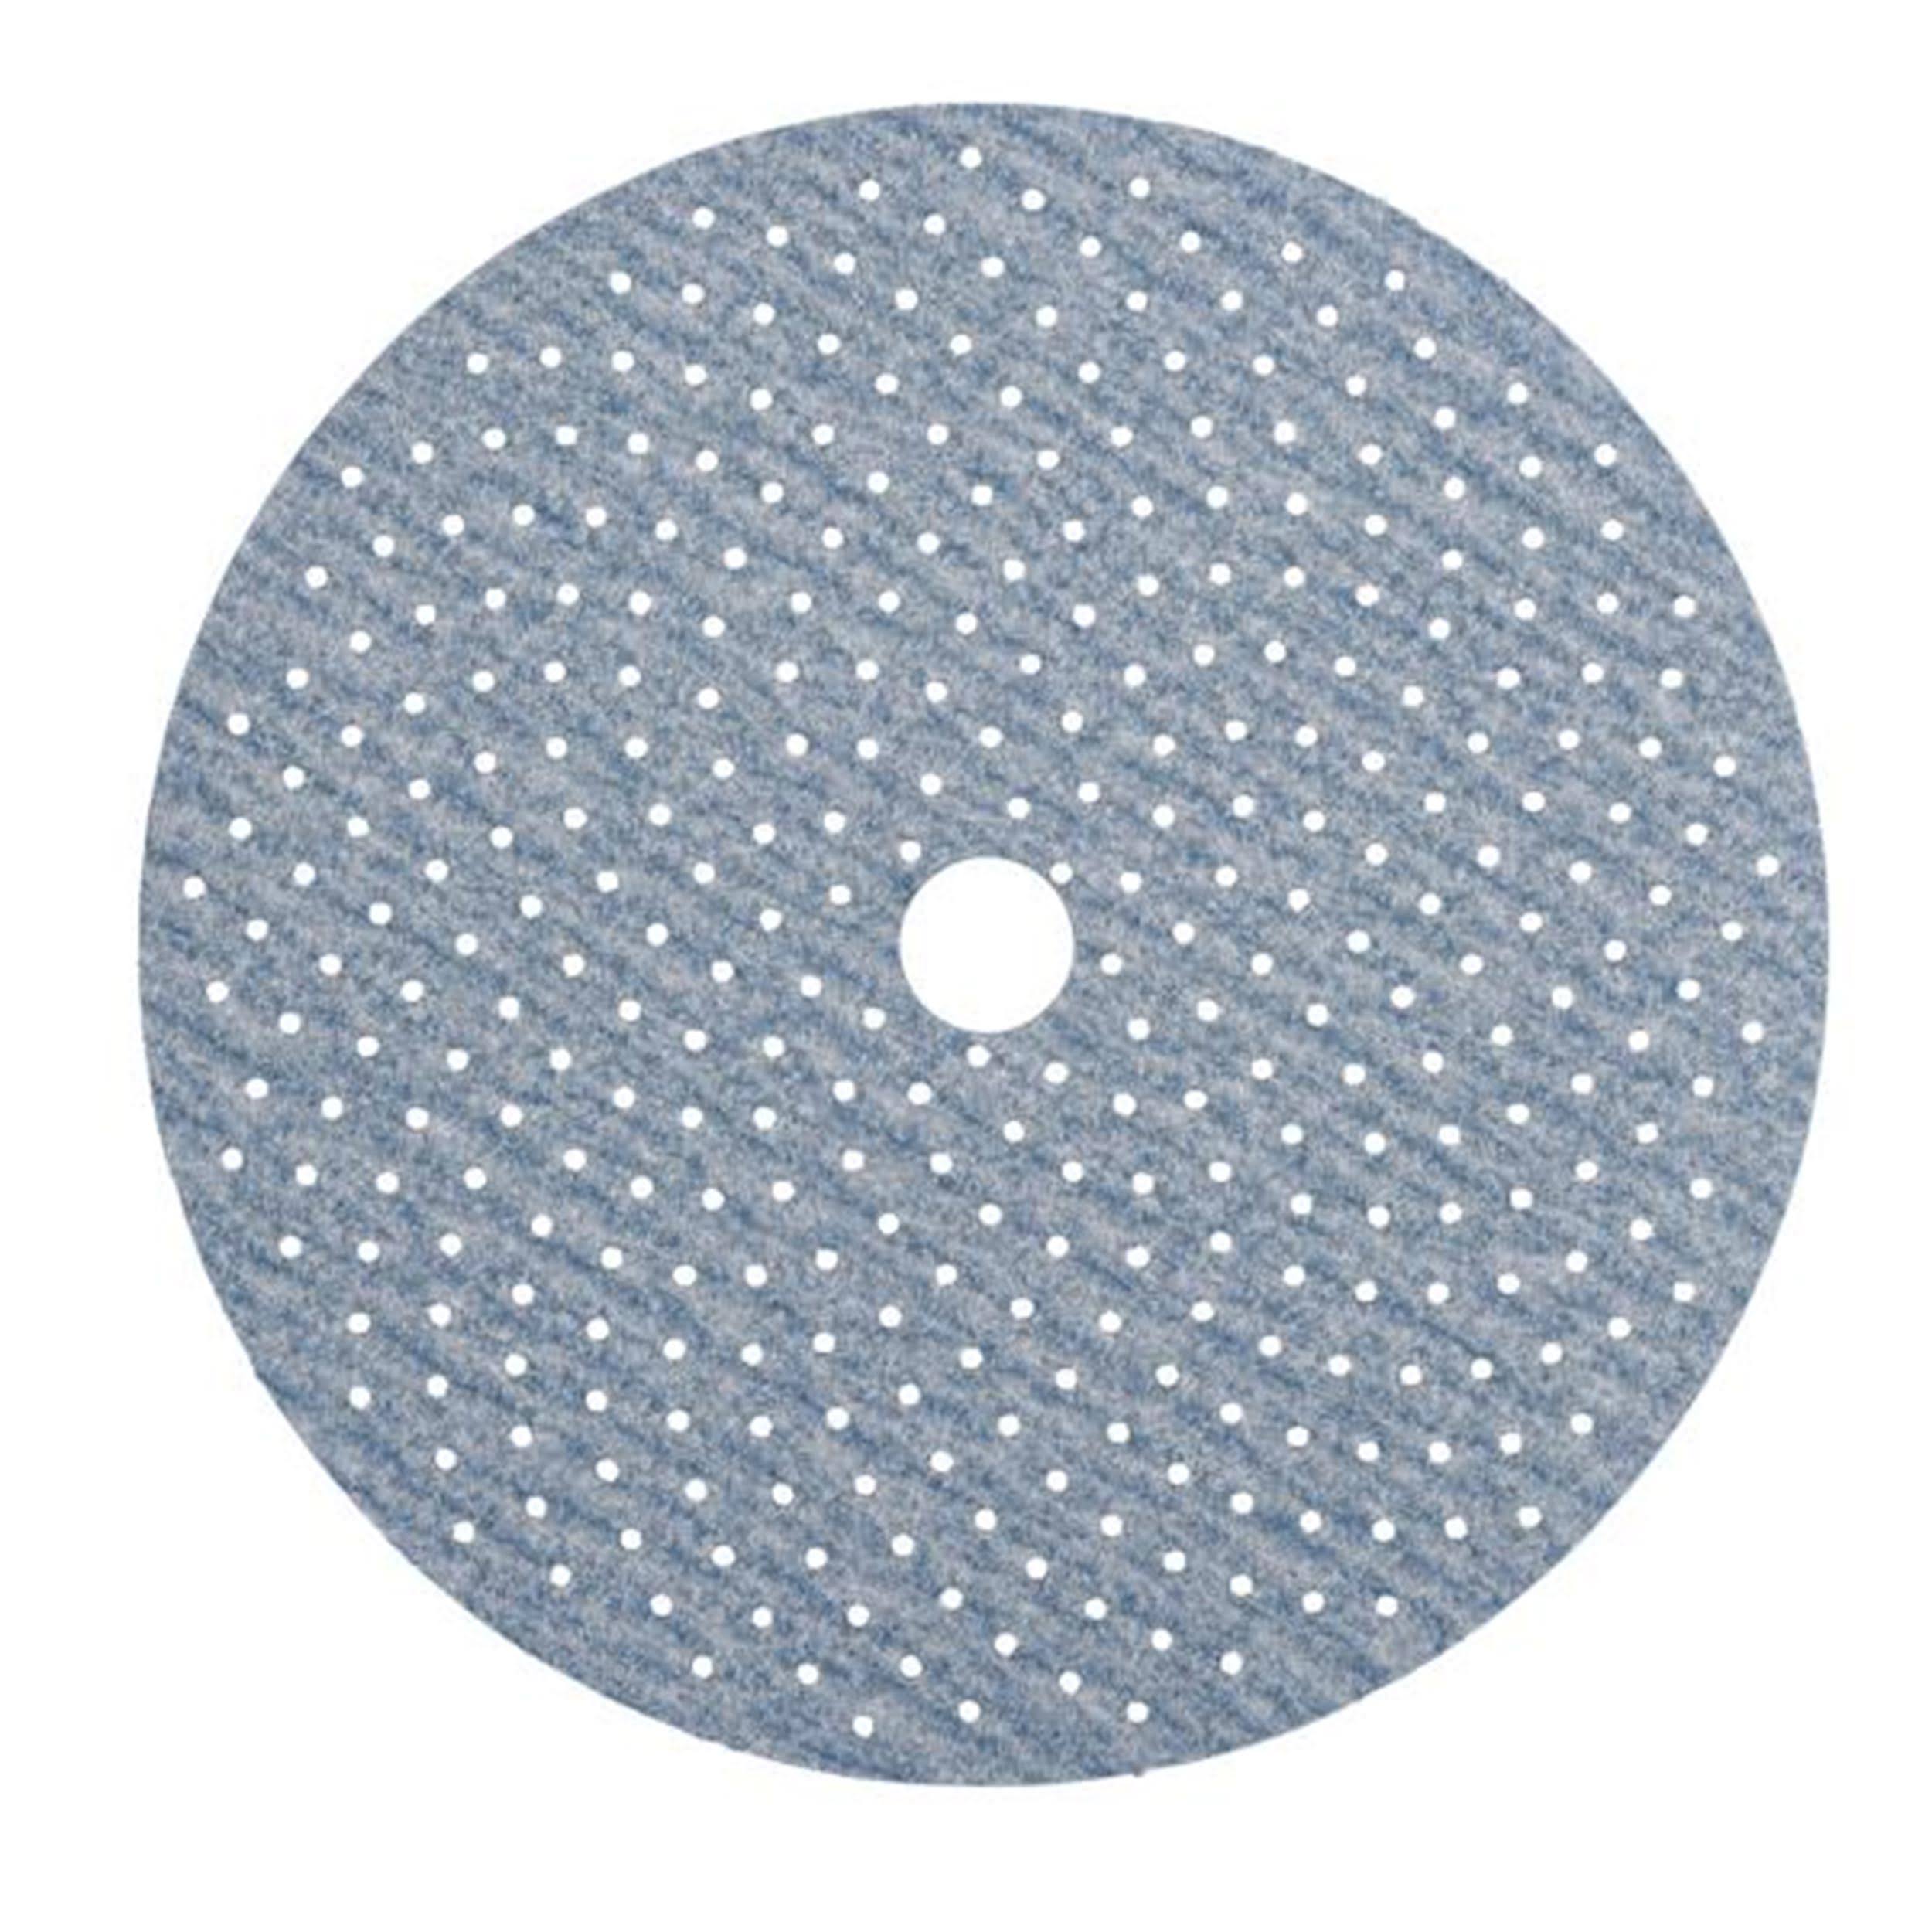 Norton High Performance Hook and Sand Paper Discs